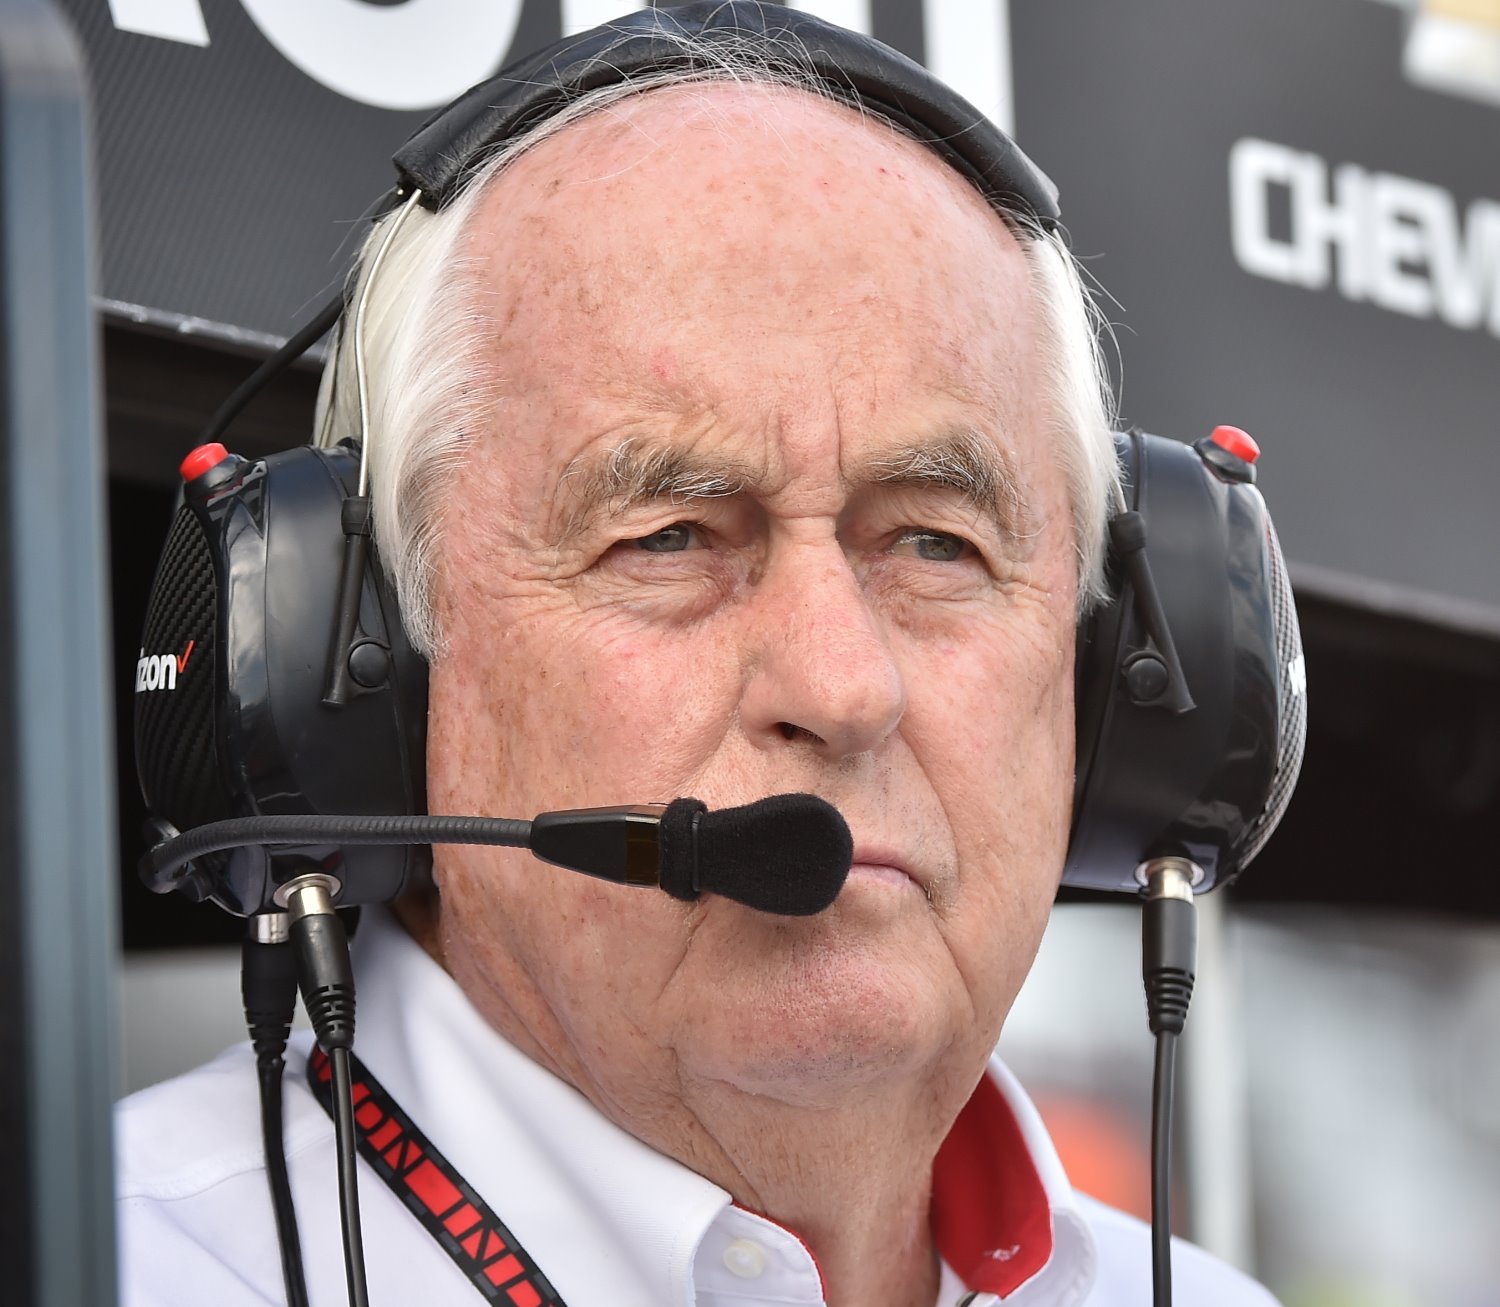 The Roger Penske's of the world don't care about the future of the sport because they figure they will be retired before it dies